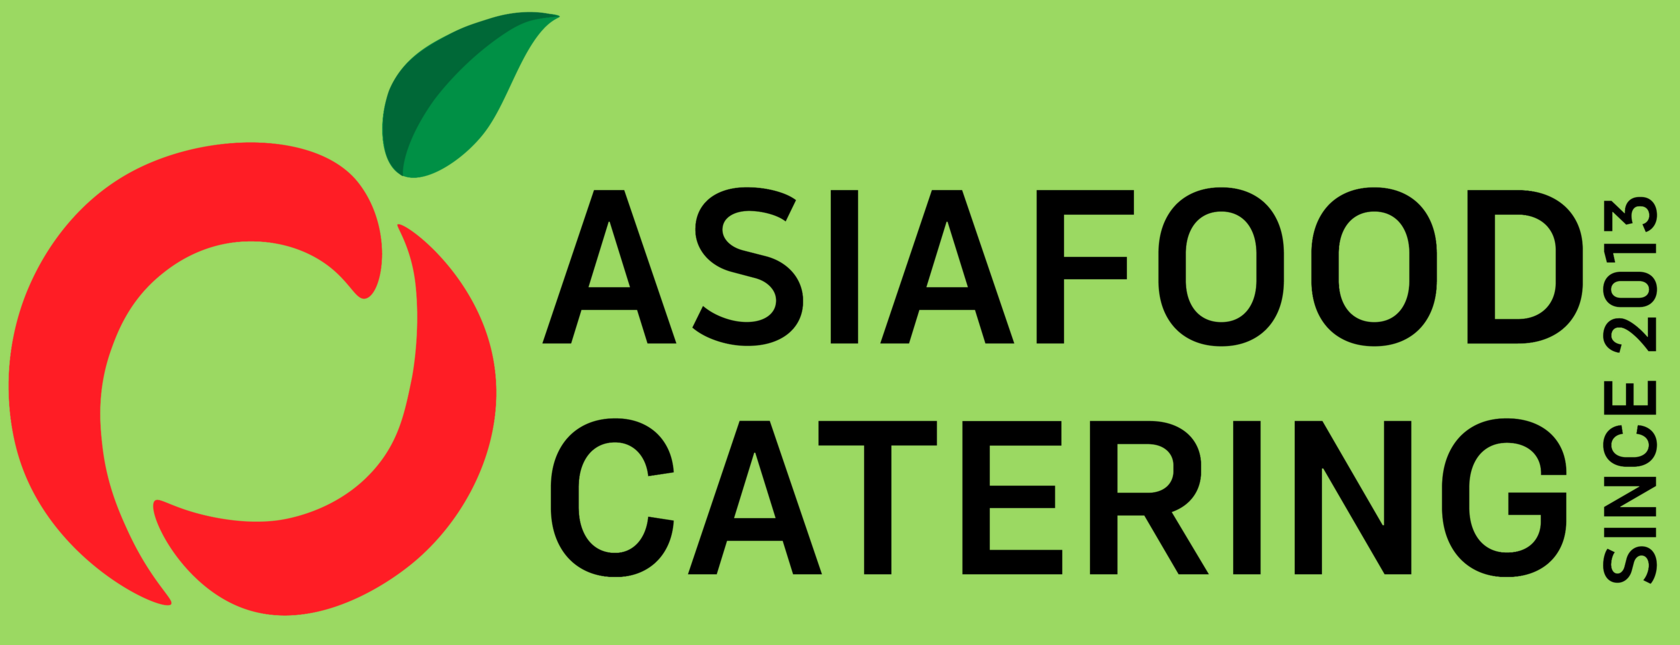 Asiafood Catering